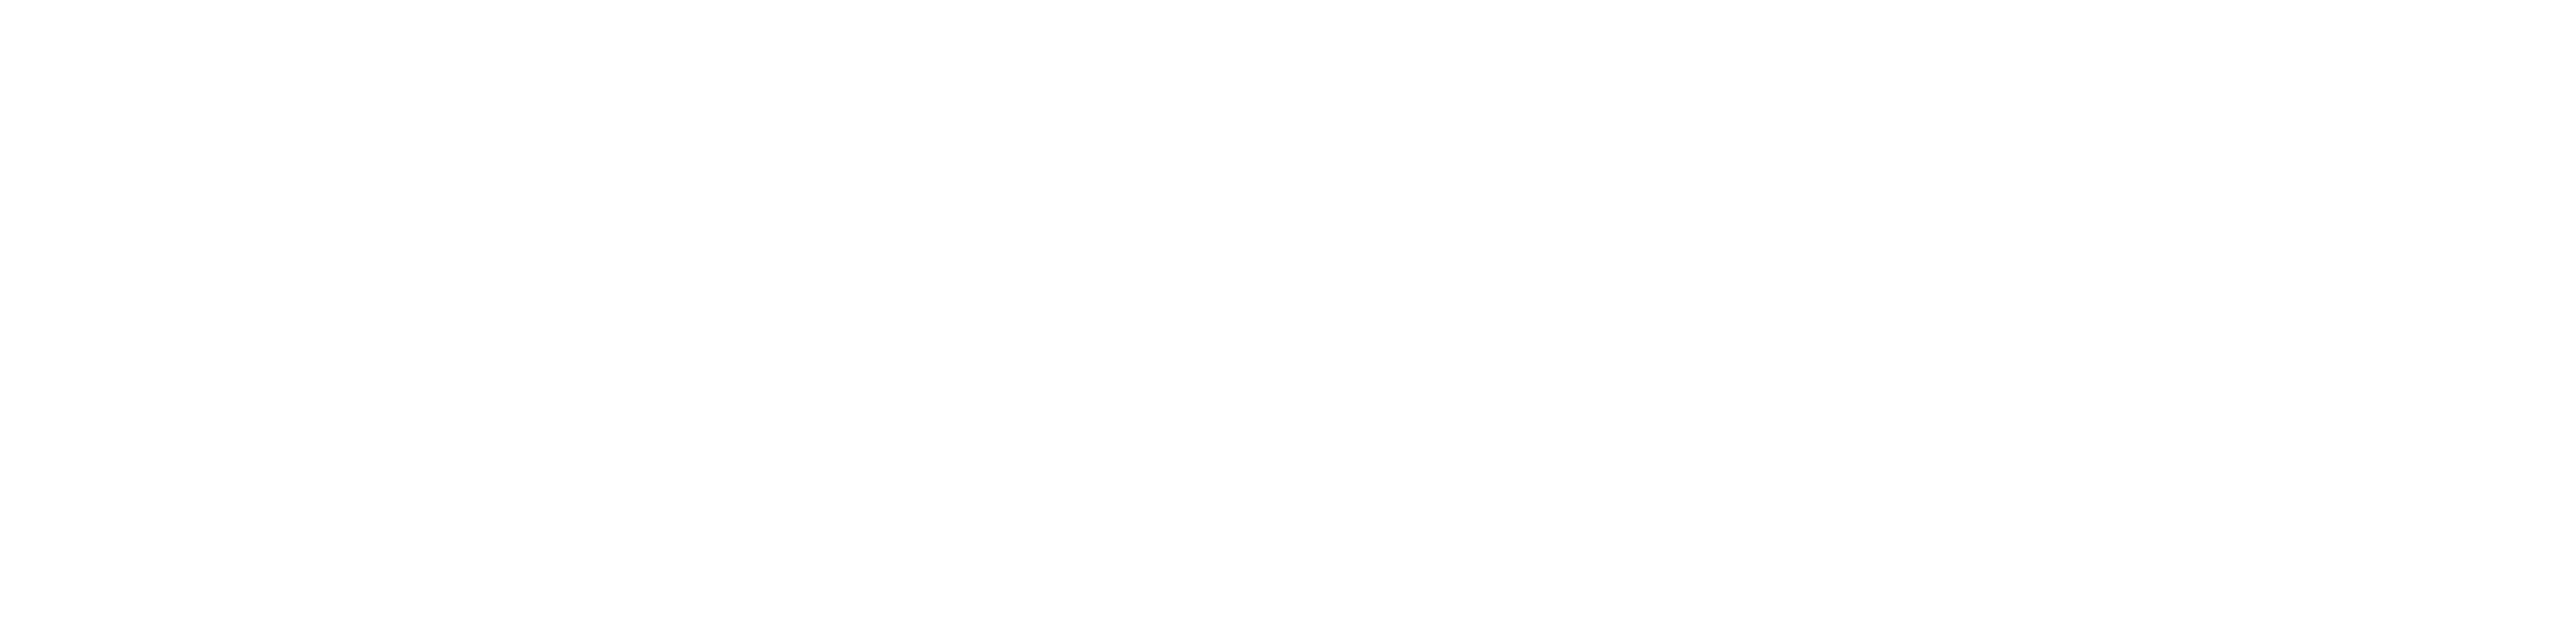 Selling Victoria Real Estate Group